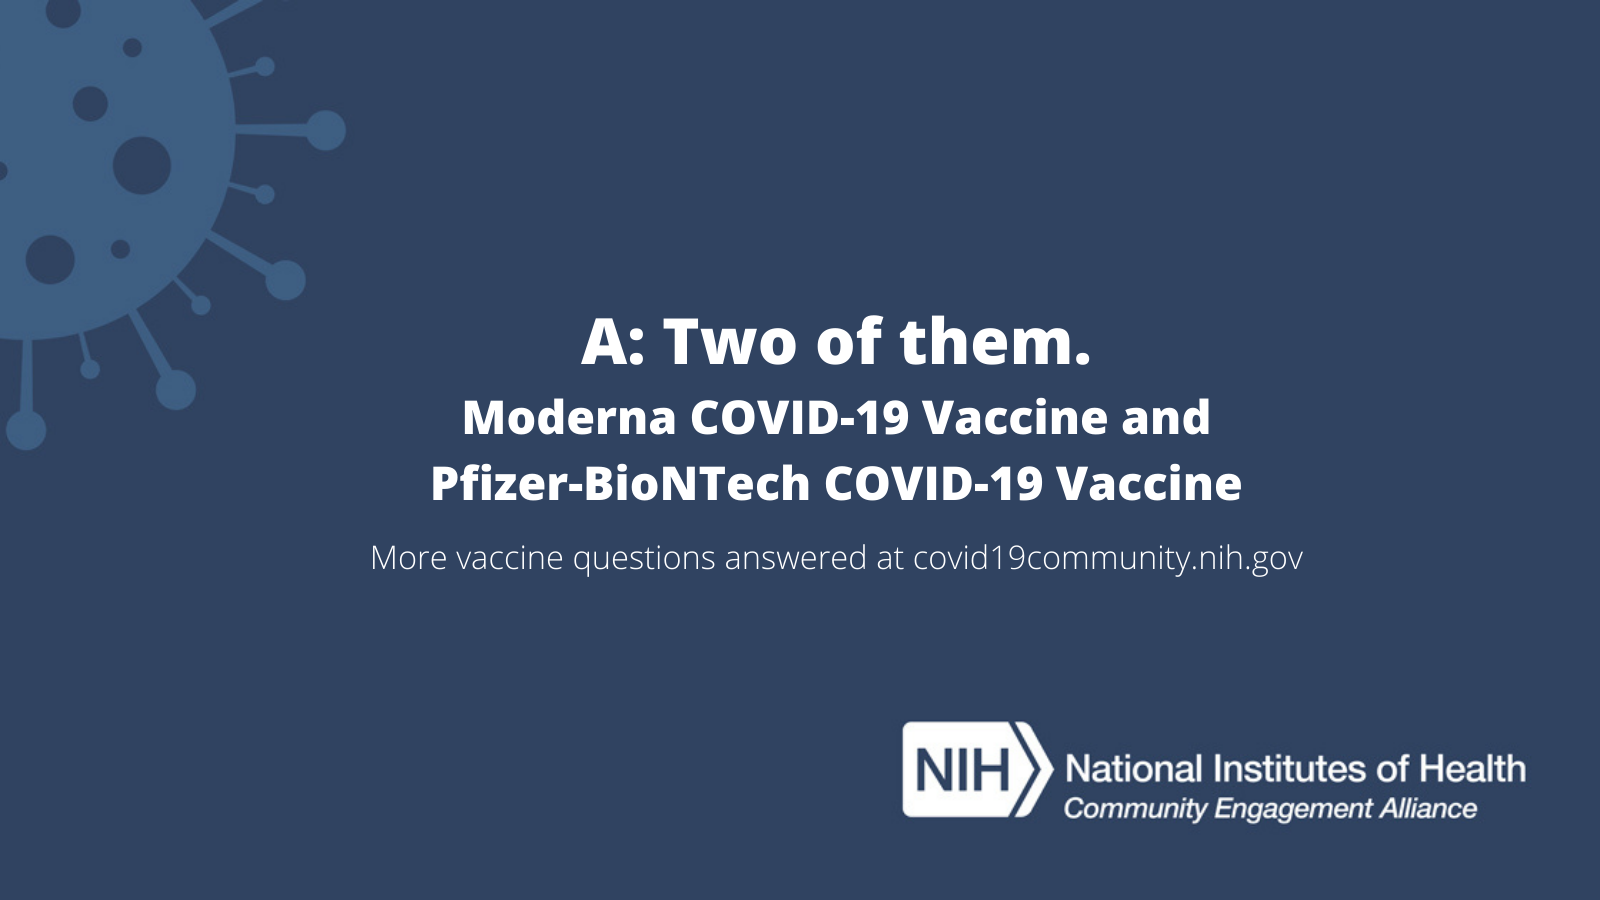 A: Two of them. Moderna COVID-19 Vaccine and Pfizer-BioNTech COVID-19 Vaccine. More vaccine questions answered at covid19community.nih.gov